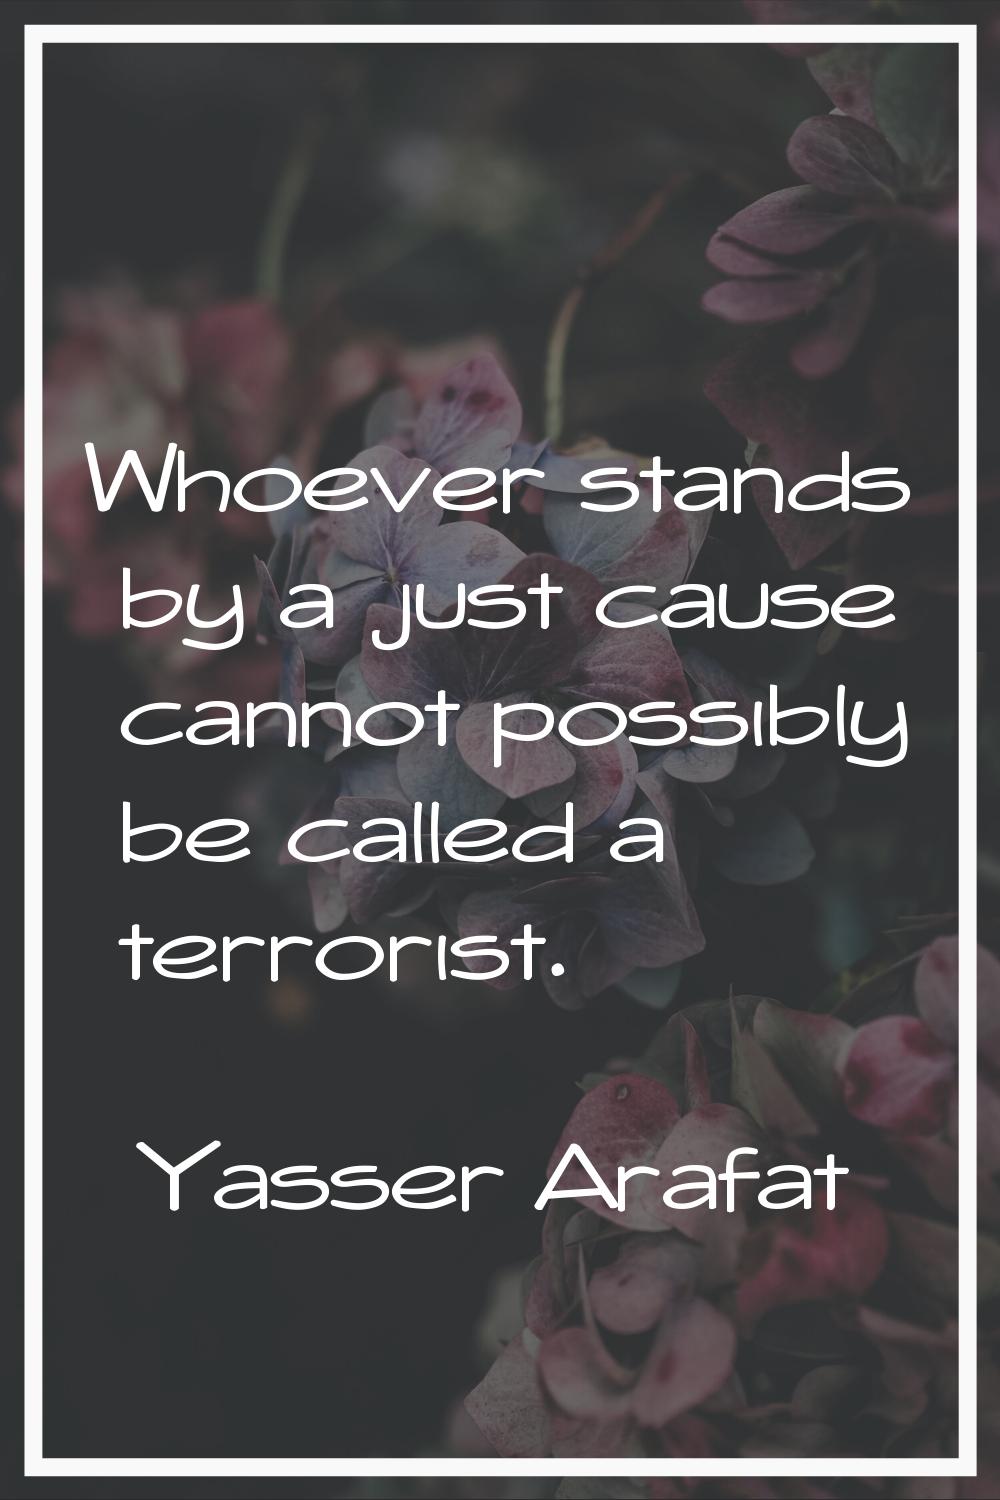 Whoever stands by a just cause cannot possibly be called a terrorist.